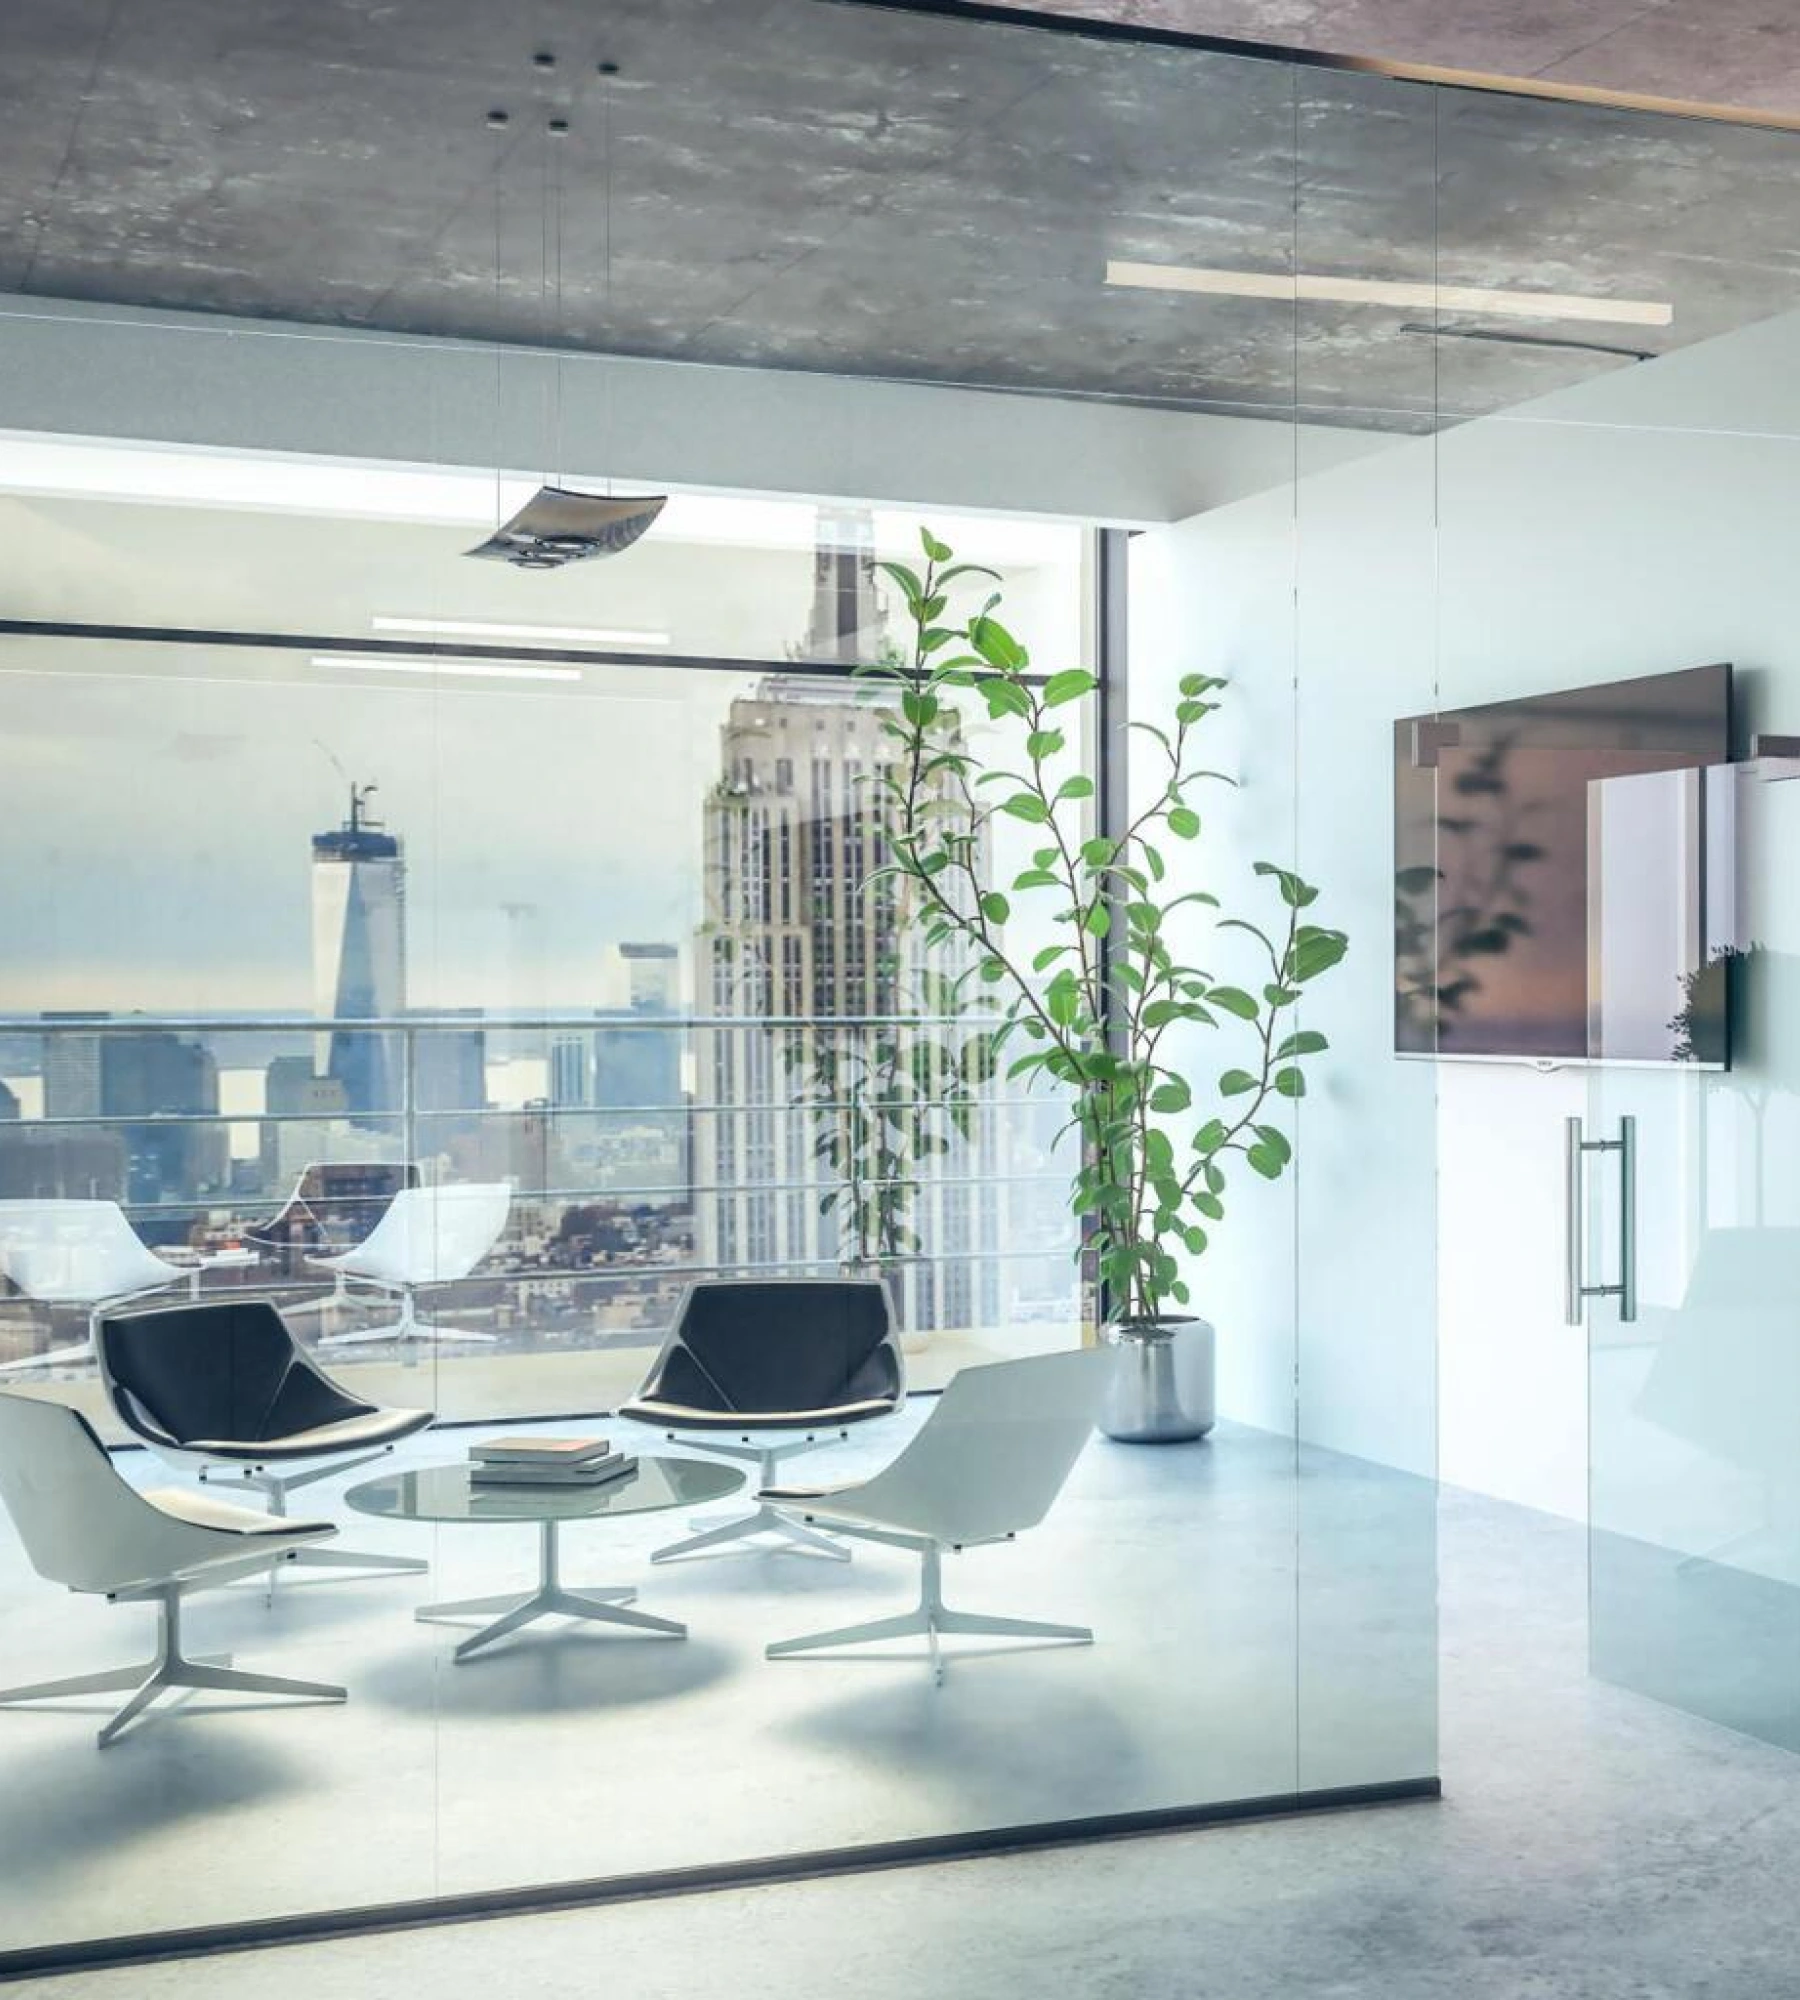 High-rise office meeting room with glass walls, modern white chairs, a city view, and indoor greenery | Elite Interiors